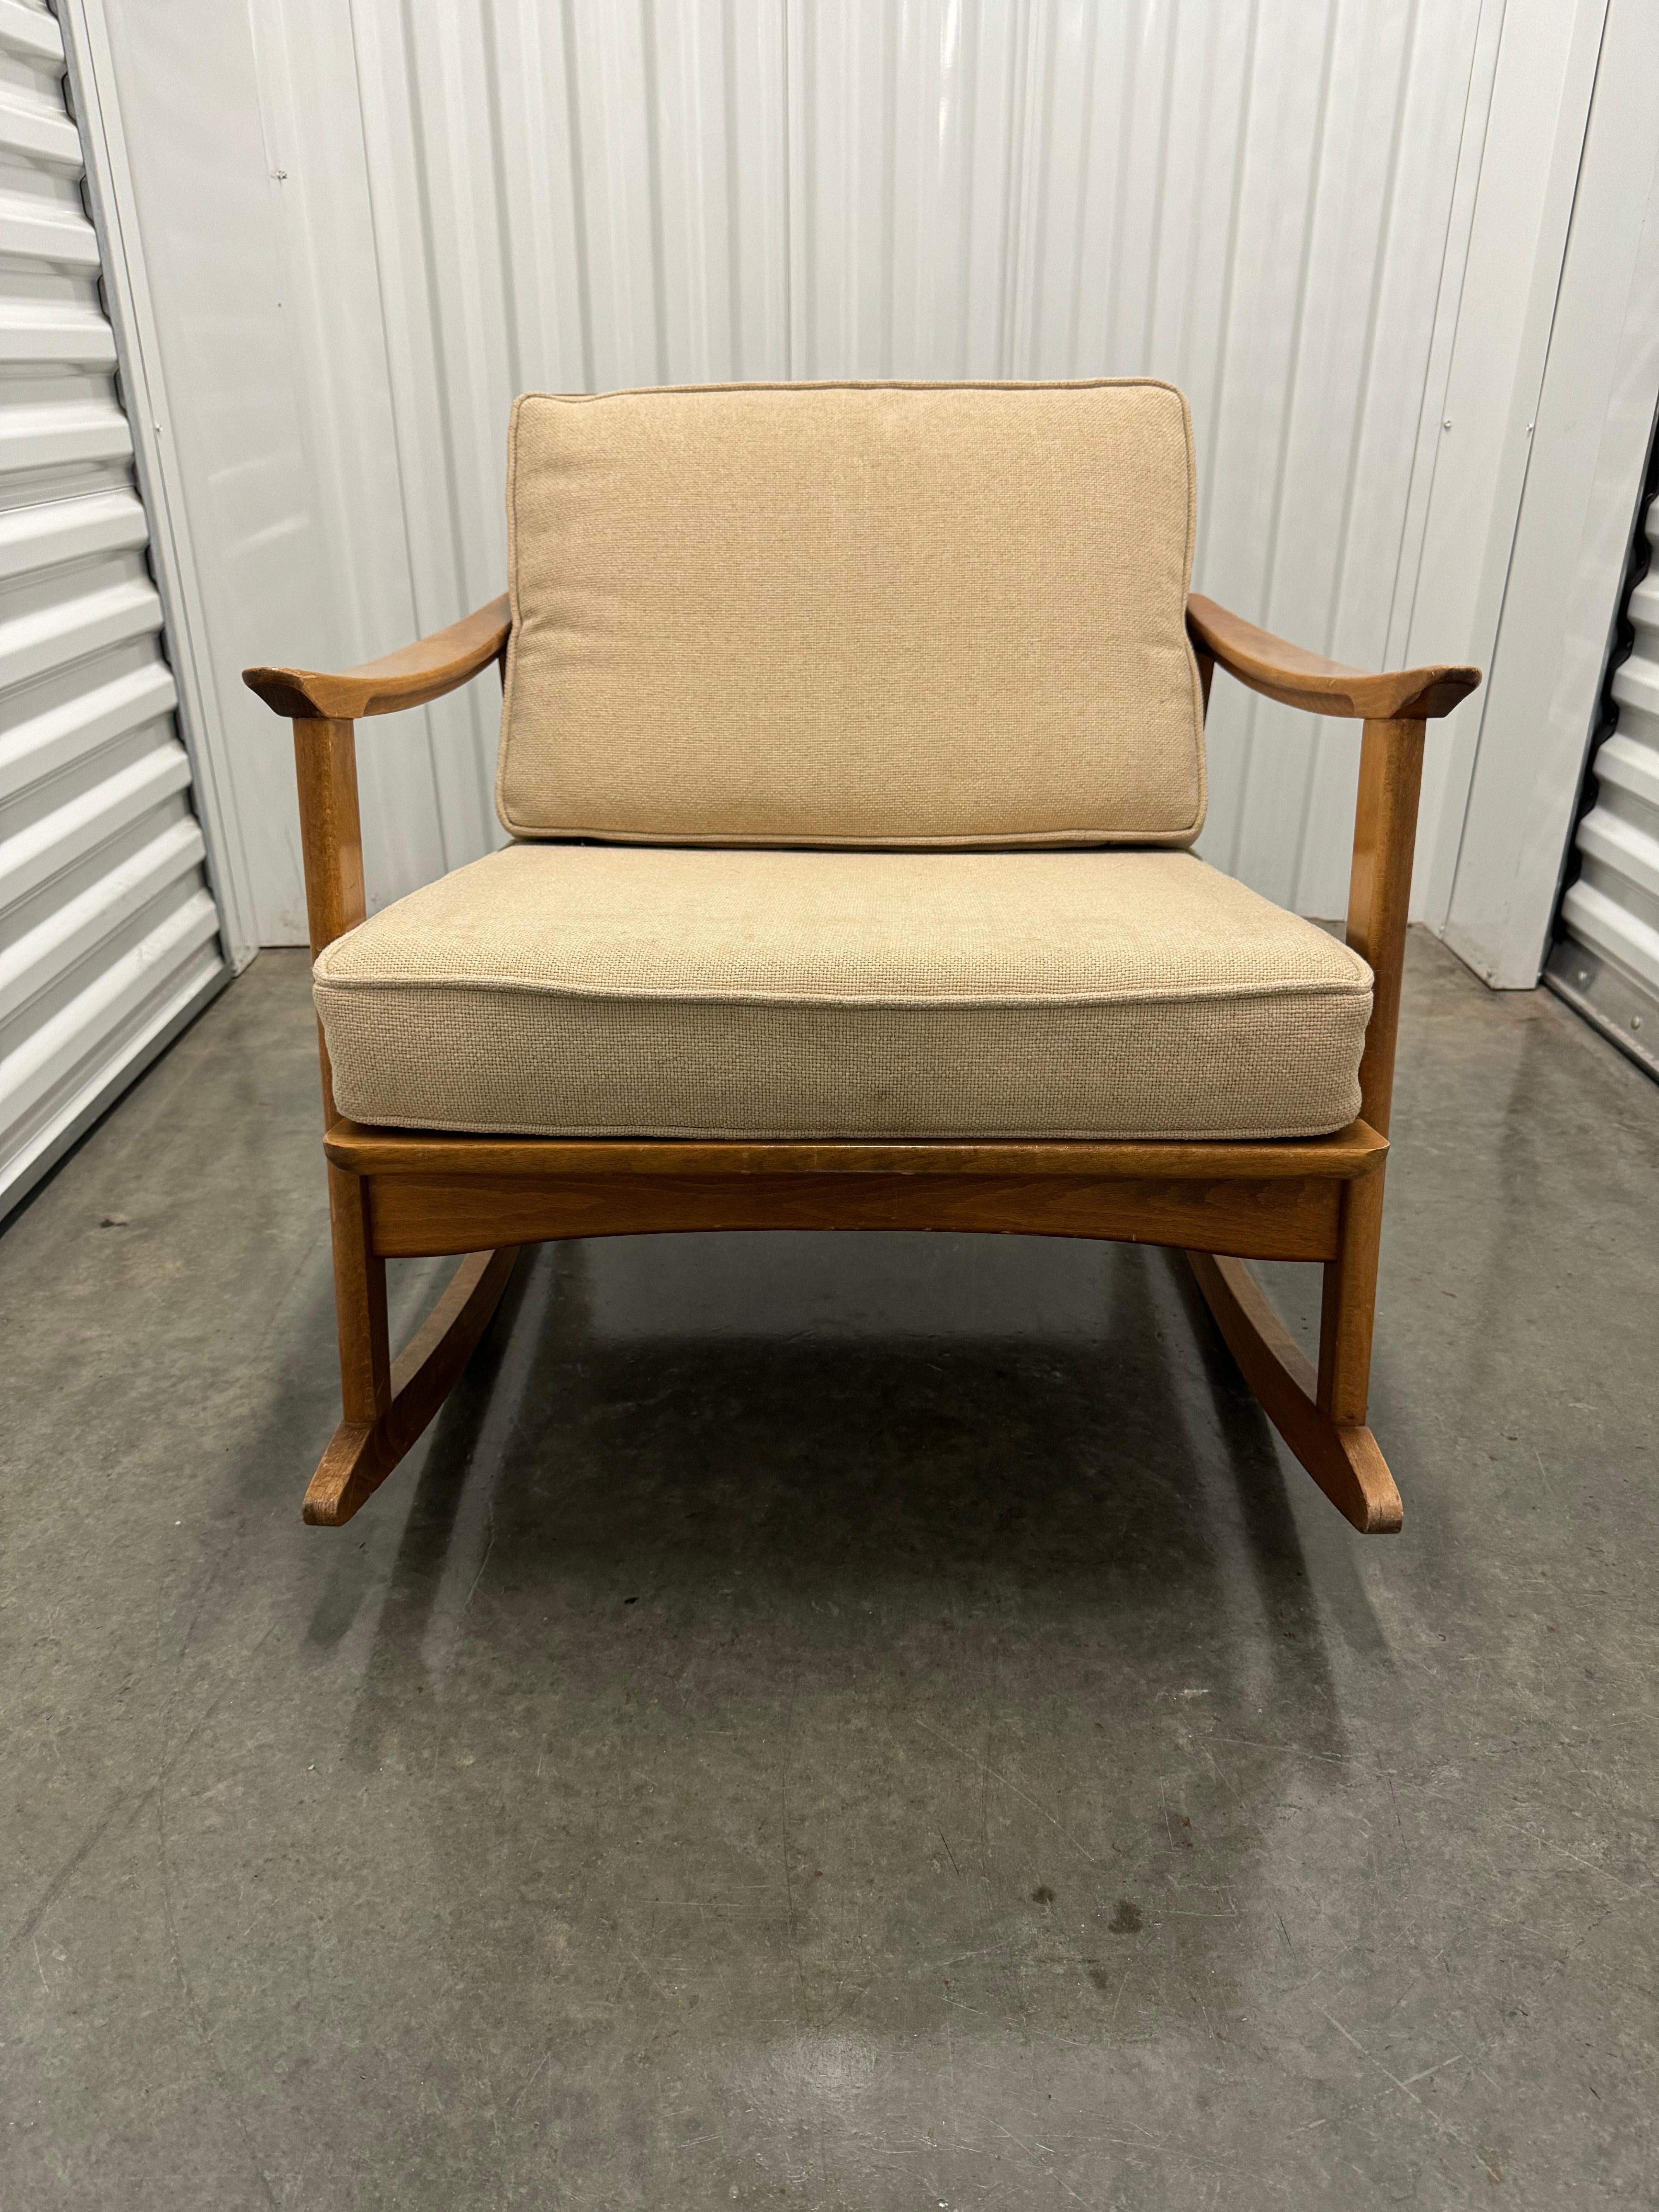 🌟 Vintage Mid Century Modern Rocking Chair from Yugoslavia 🌟

Step back in time with this stunning piece of mid century modern design! Inspired by the great Danish rocking chairs, this beautiful walnut rocking chair hails from the former state of